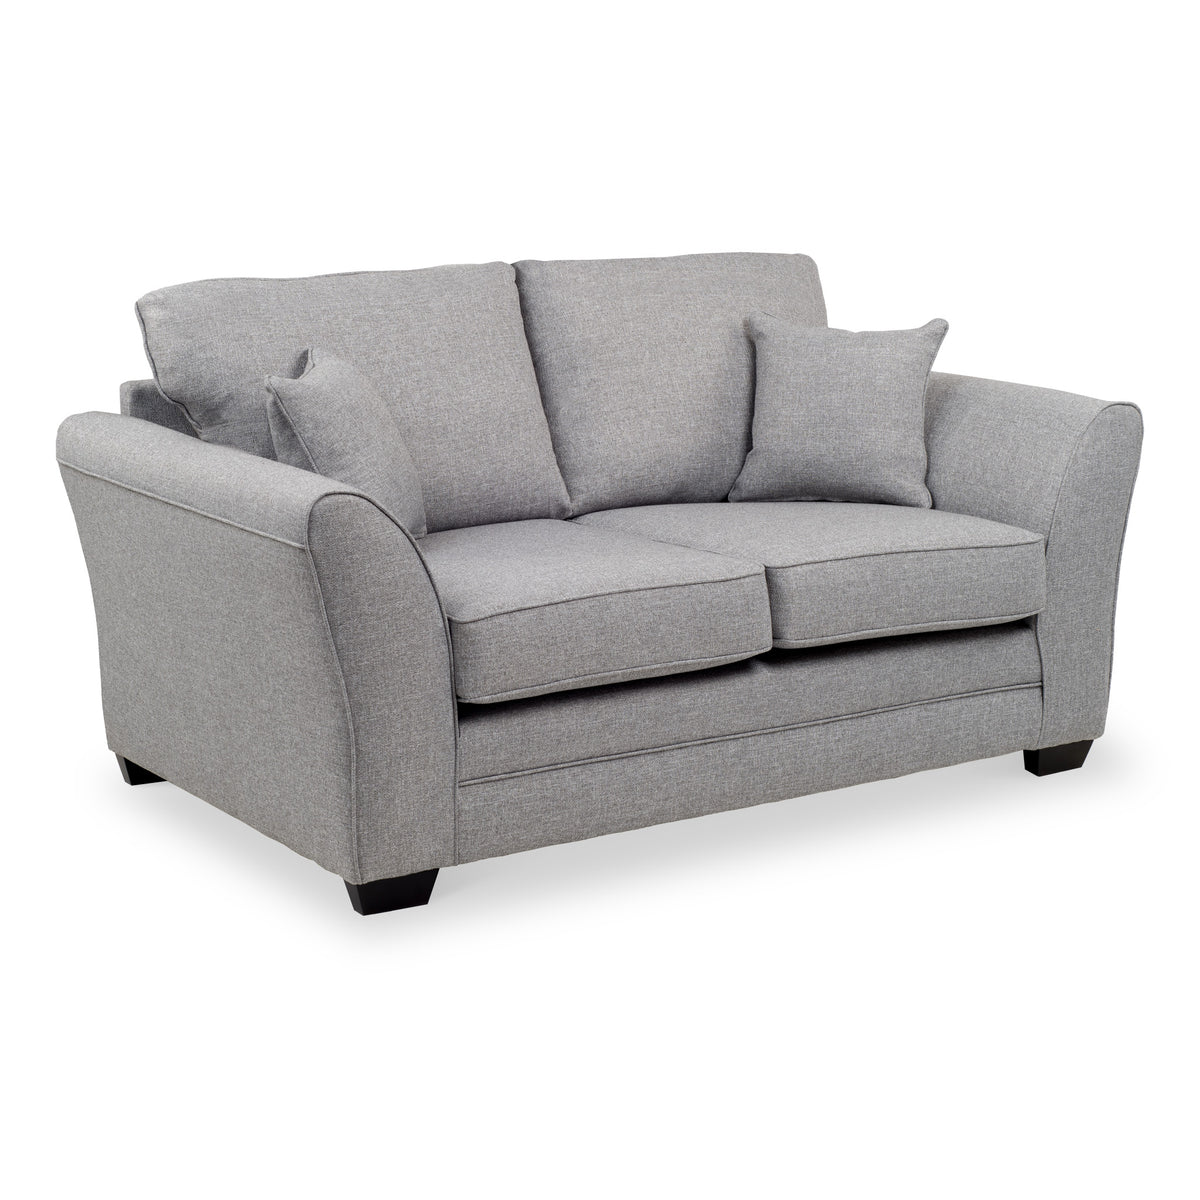 St Ives 2 Seater Sofa in Silver by Roseland Furniture